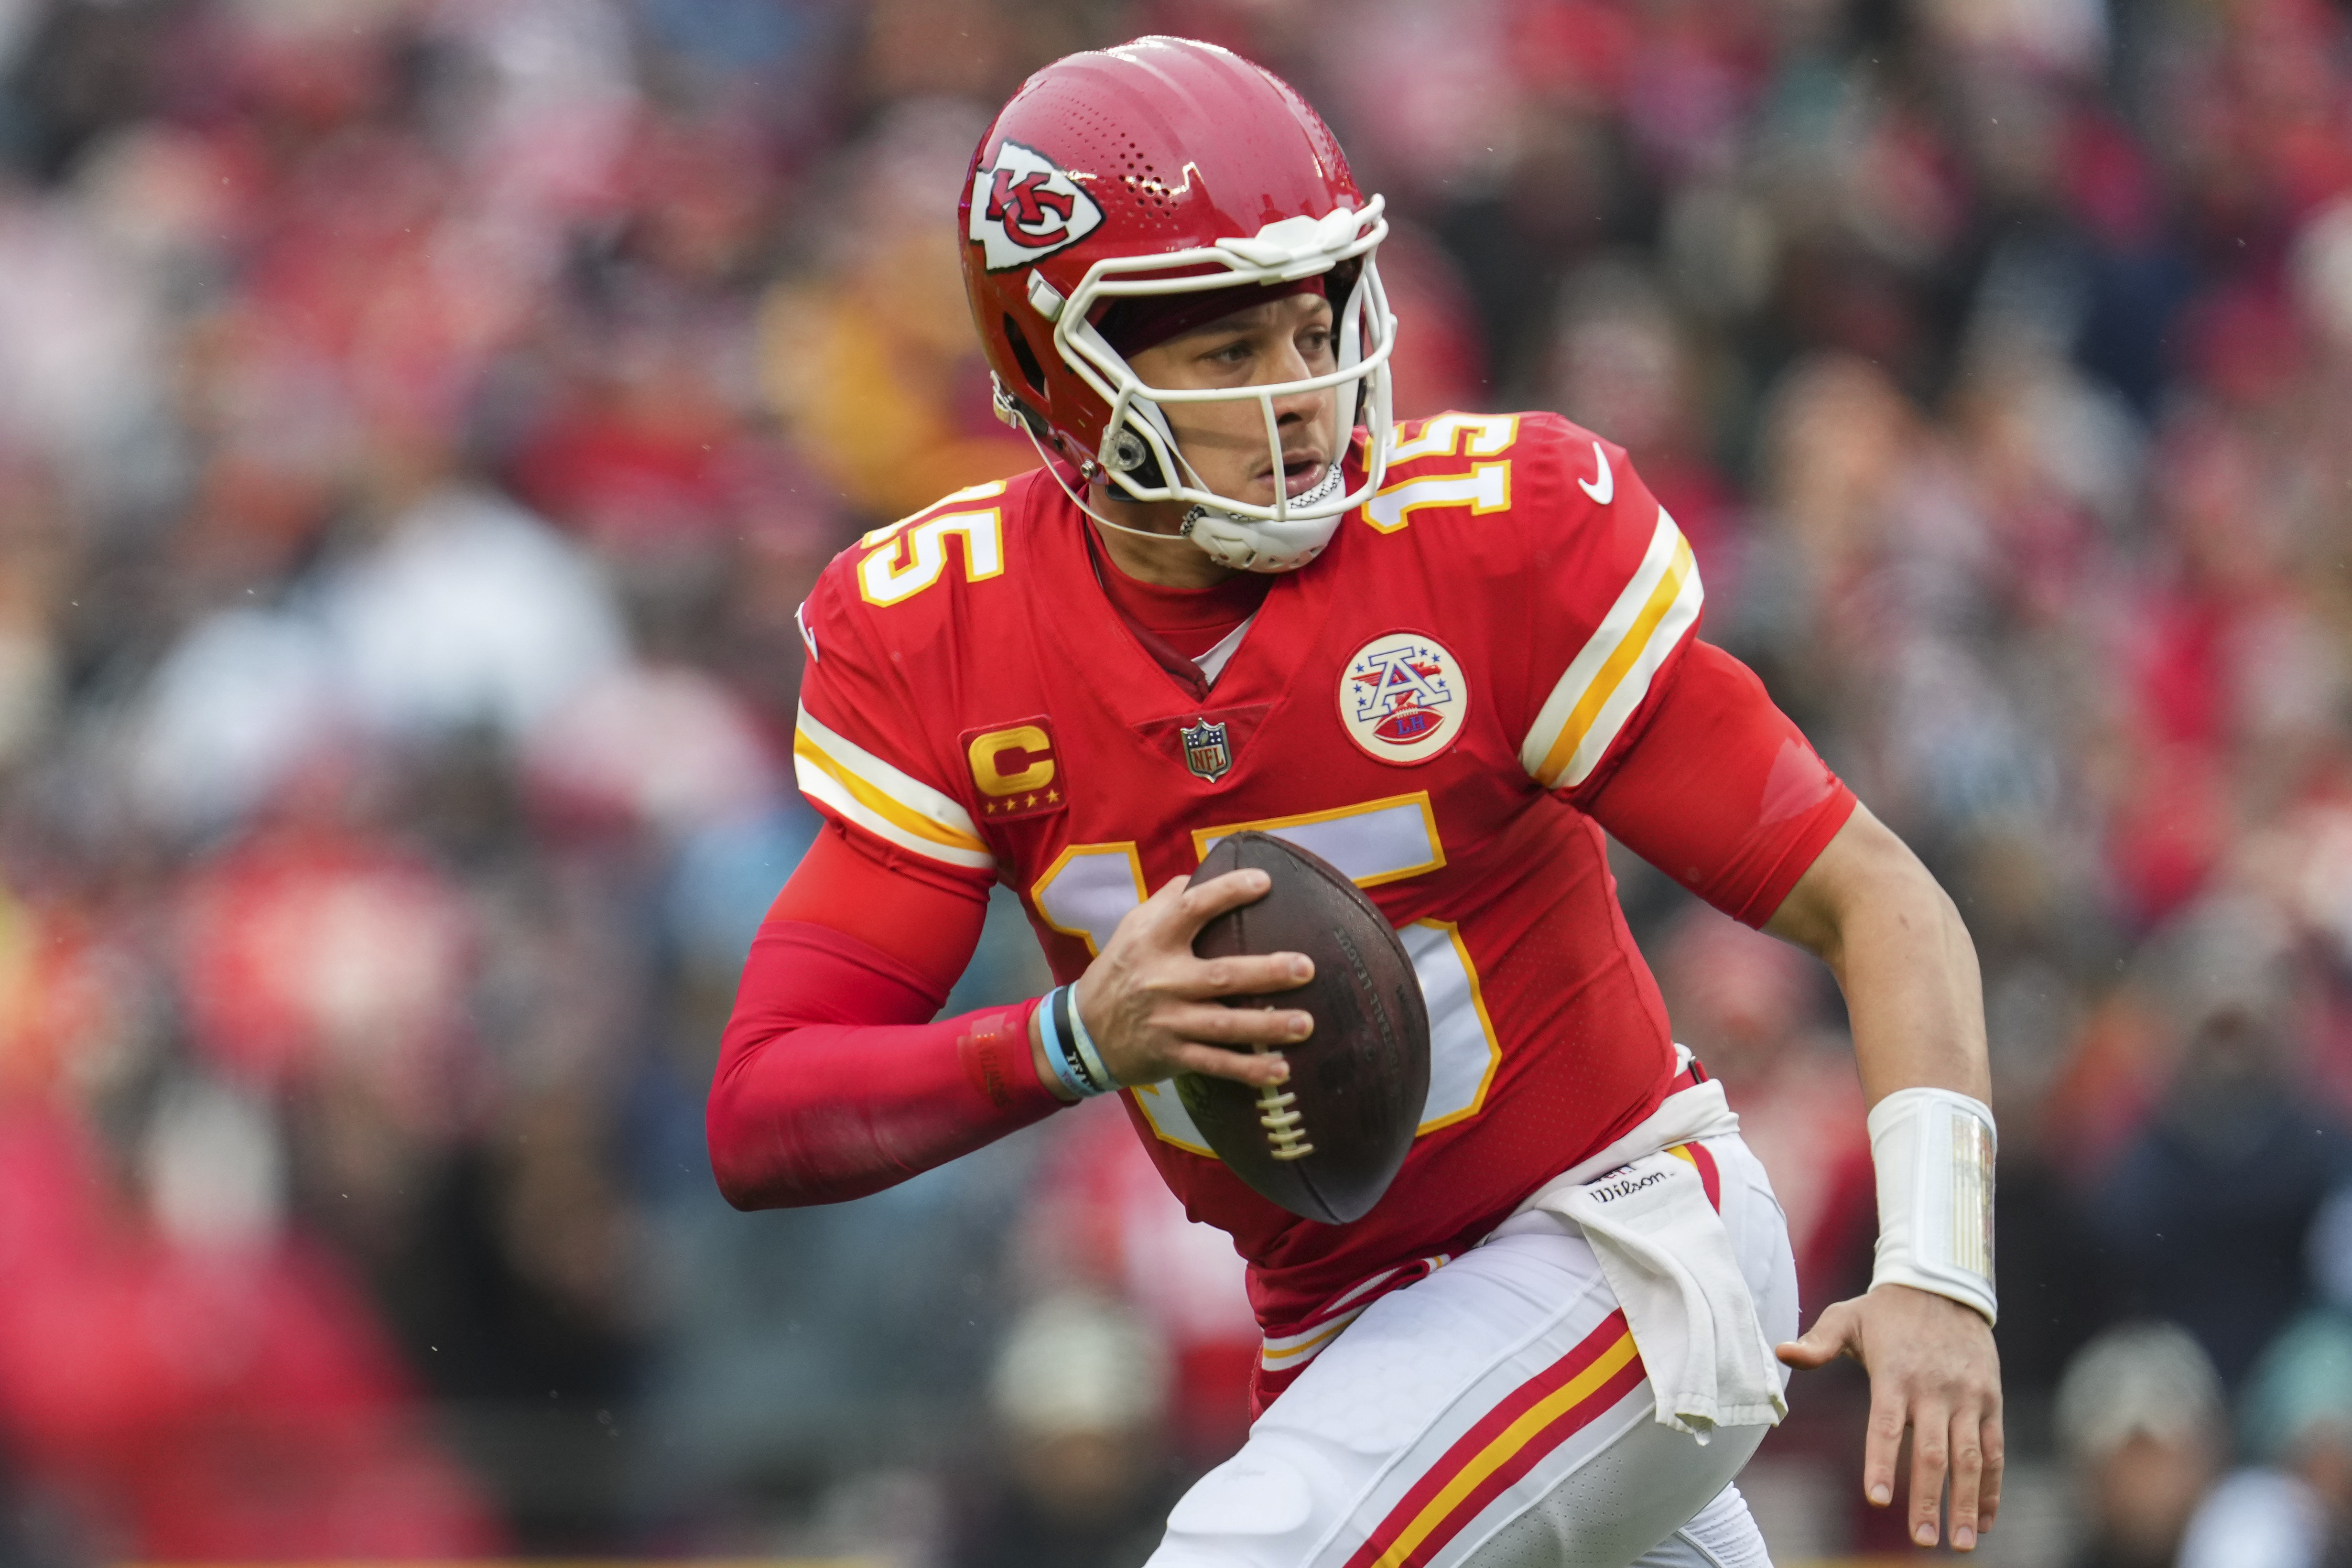 Quarterback Patrick Mahomes of the Kansas City Chiefs runs with the ball in the NFL American Football Conference Divisional Round game against the Jacksonville Jaguars at Arrowhead Stadium in Kansas City, Missouri, January 21, 2023. /CFP